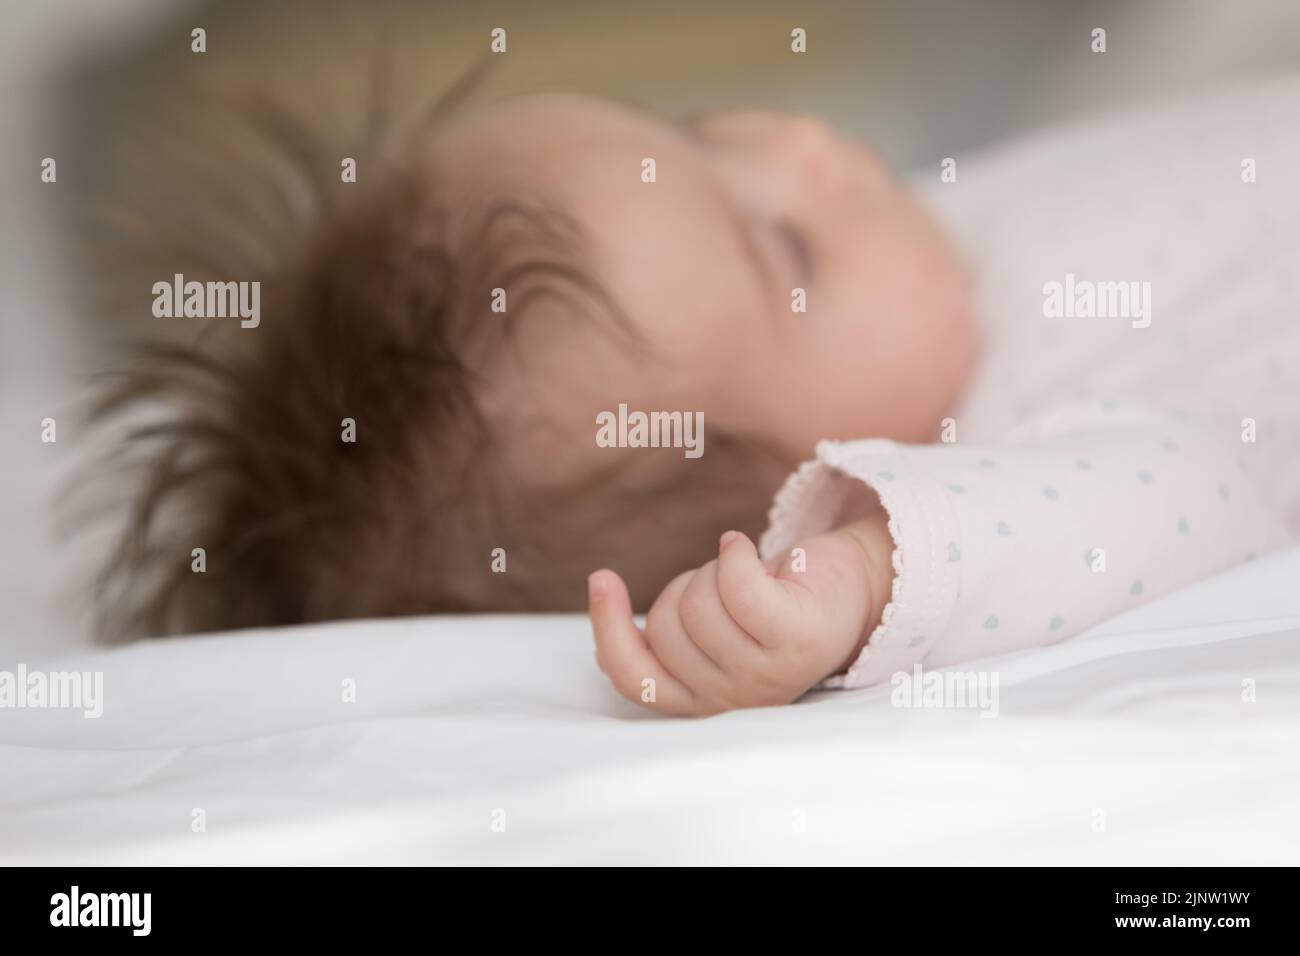 Close up new-born baby sleeping in bed Stock Photo